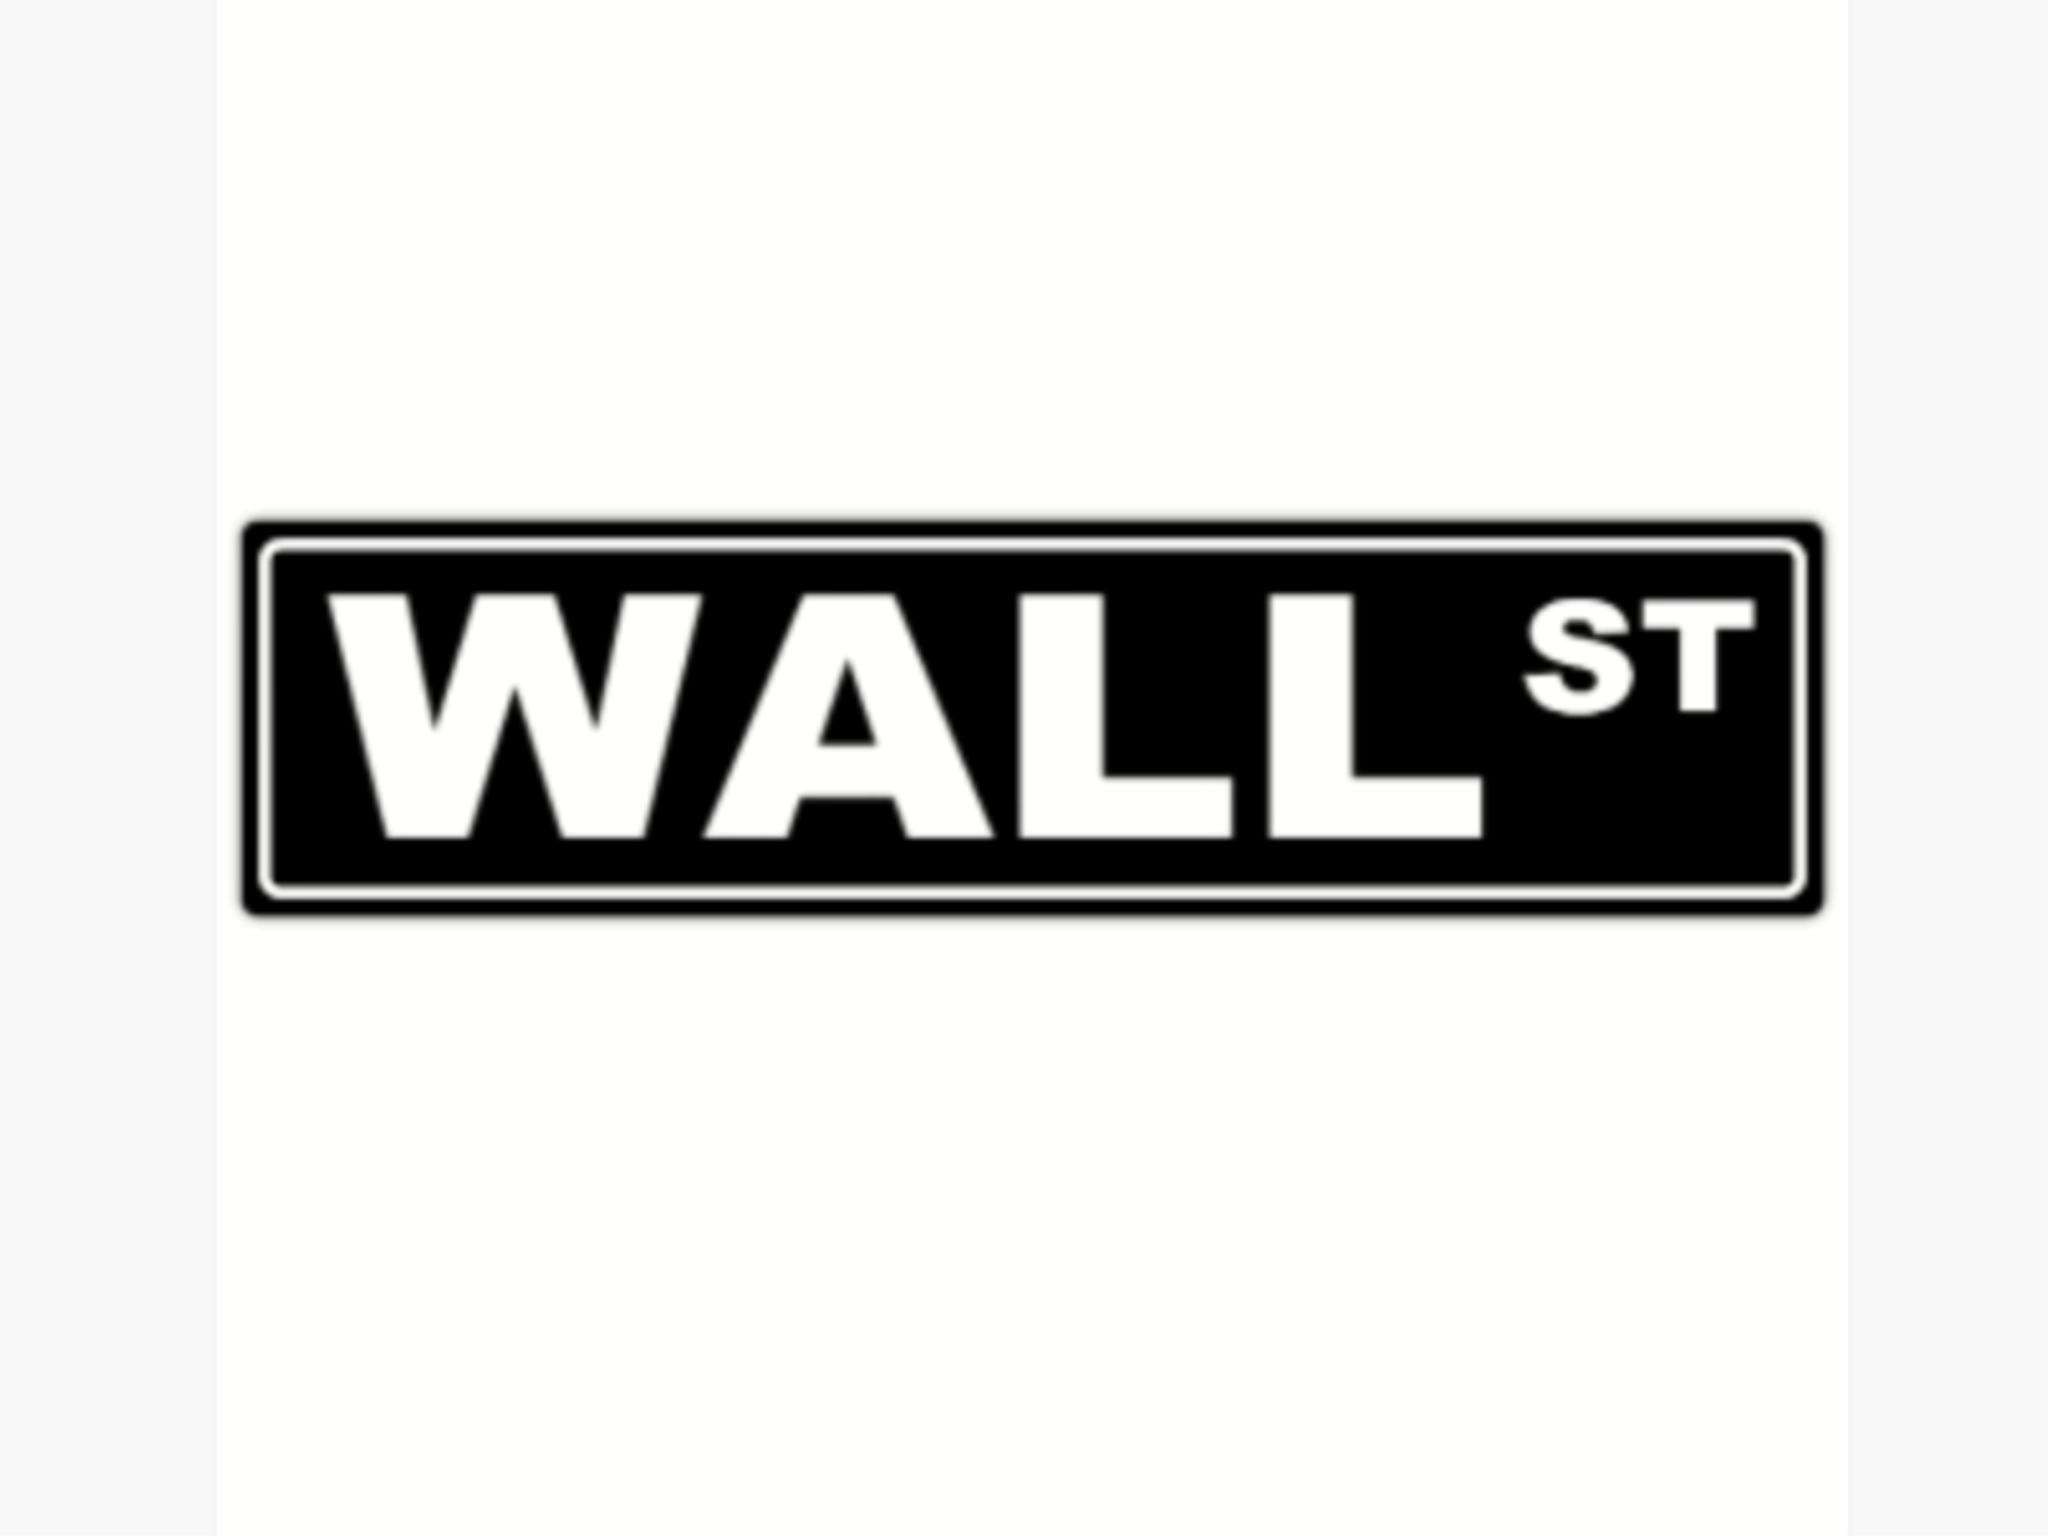 Wall Street a Division of the New World Order 